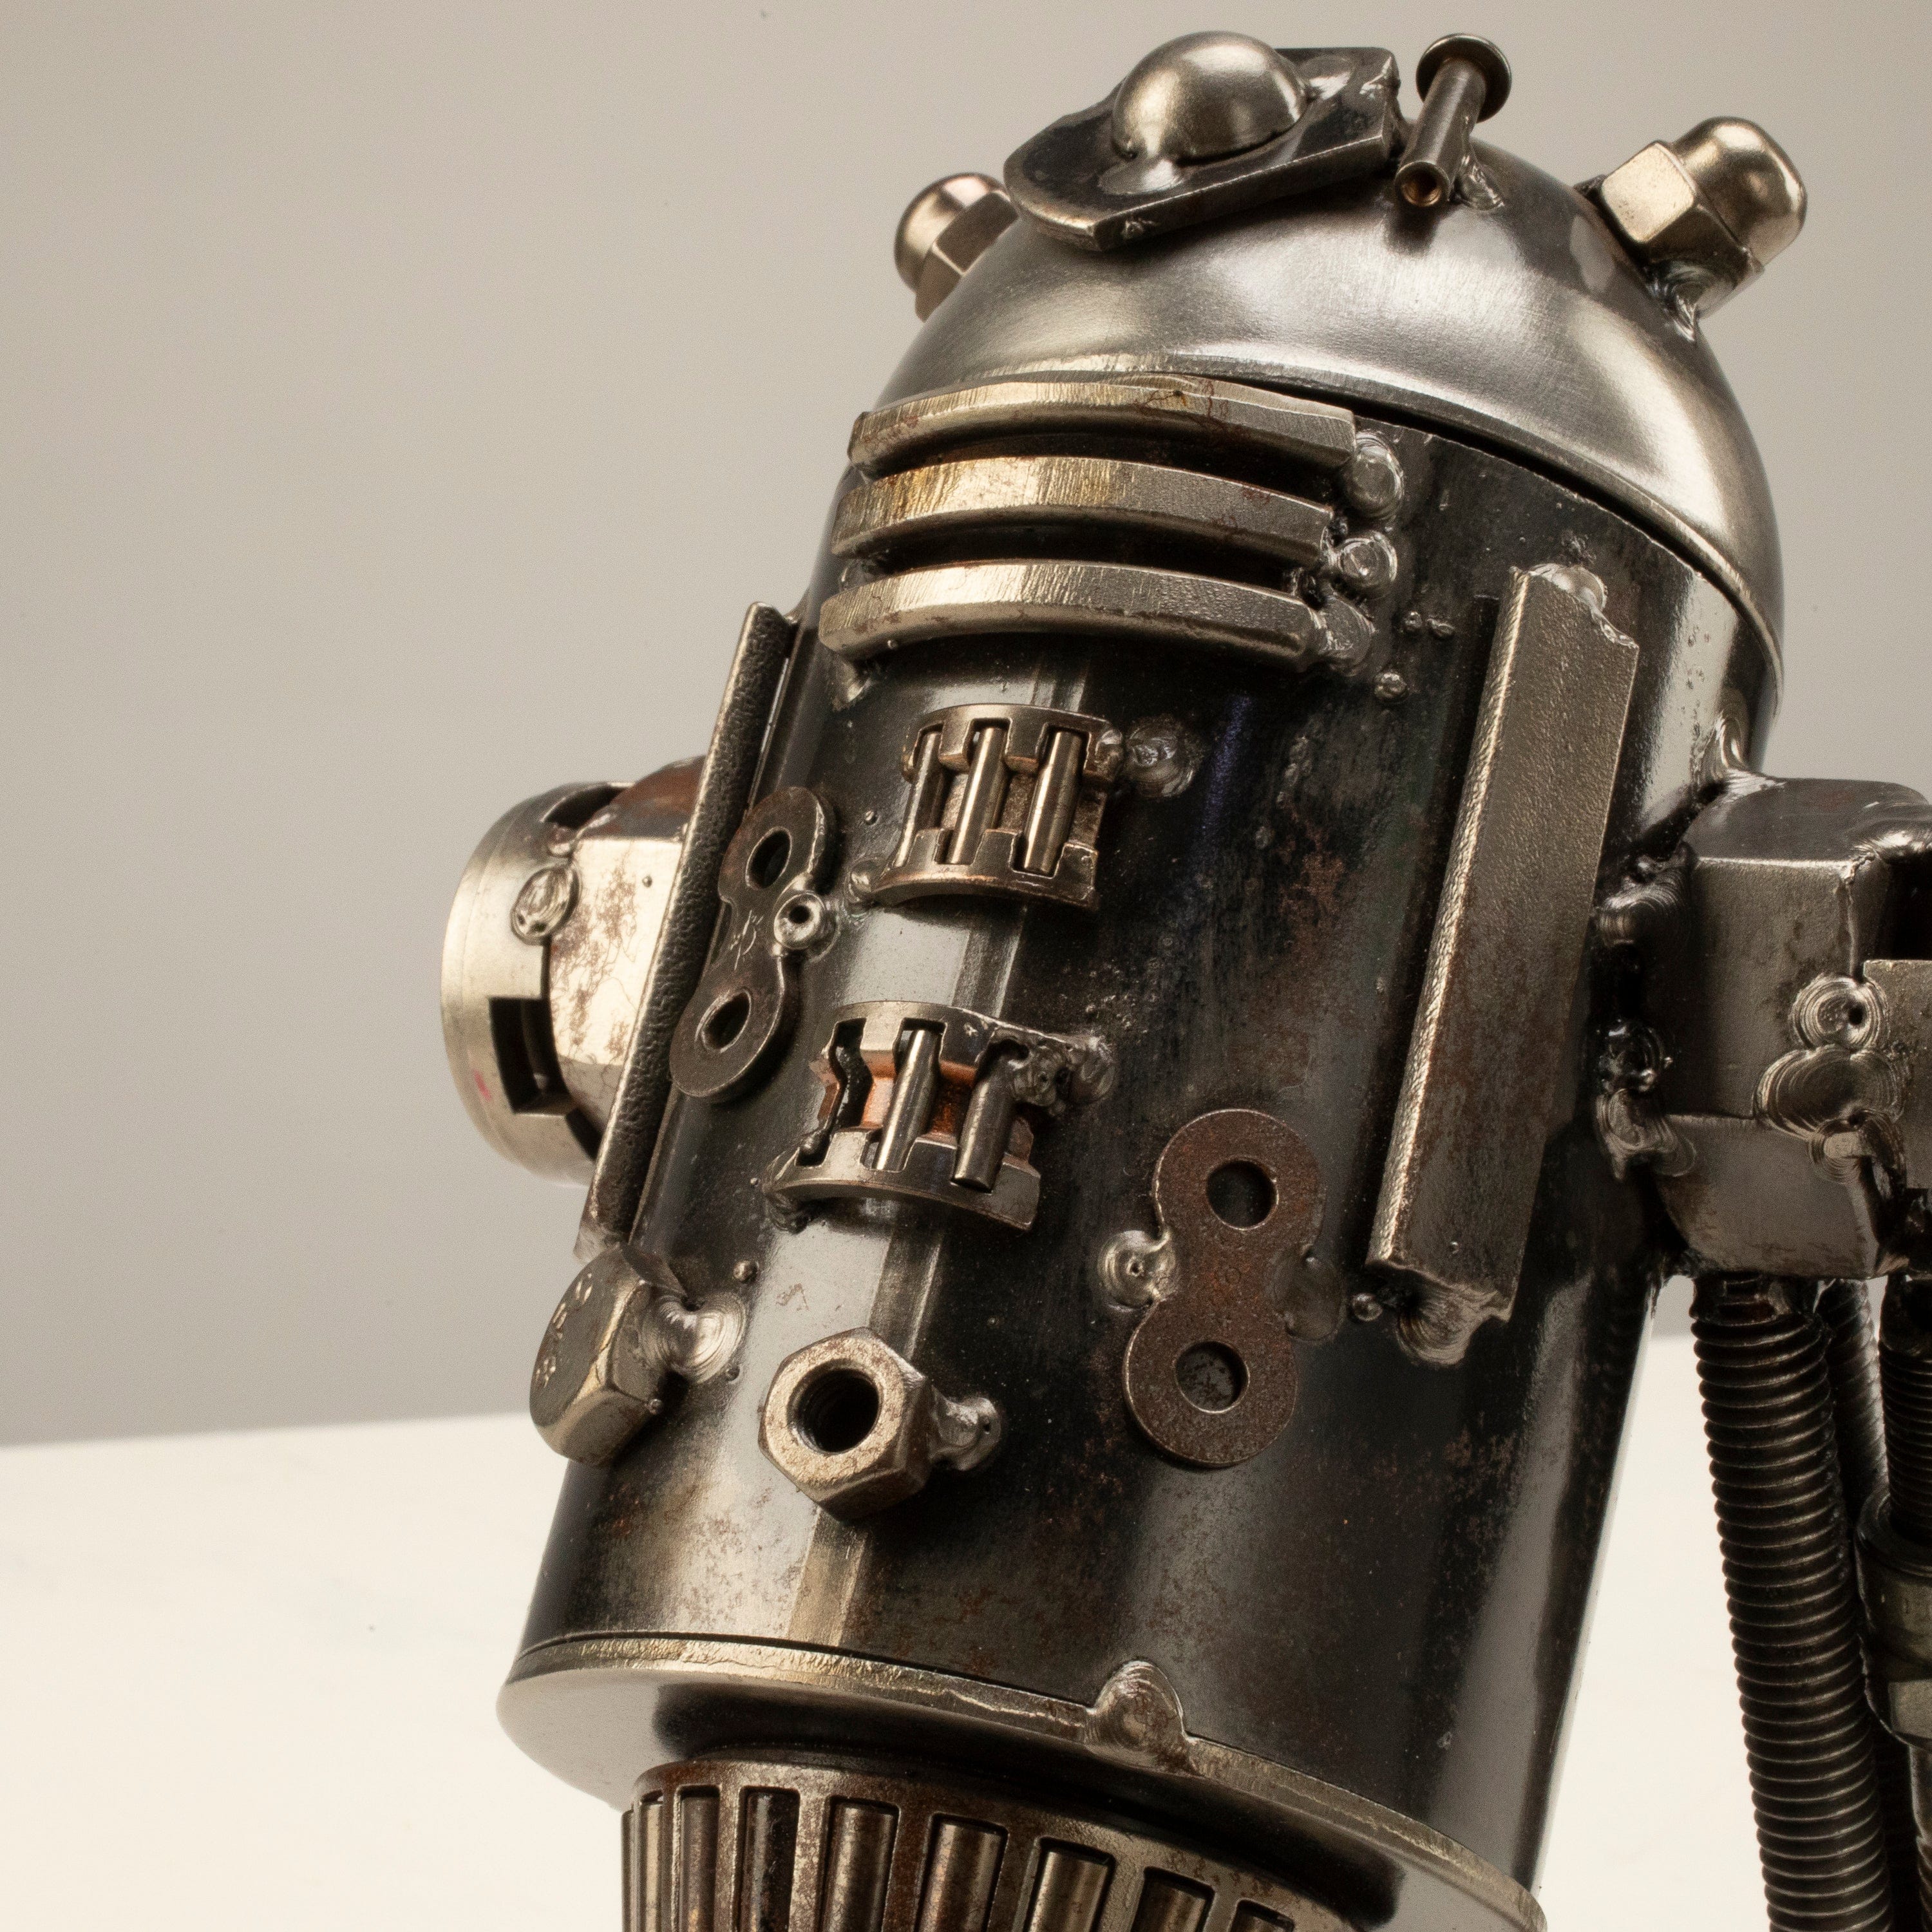 Kalifano Recycled Metal Art R2D2 Inspired Recycled Metal Sculpture RMS-450R2-N